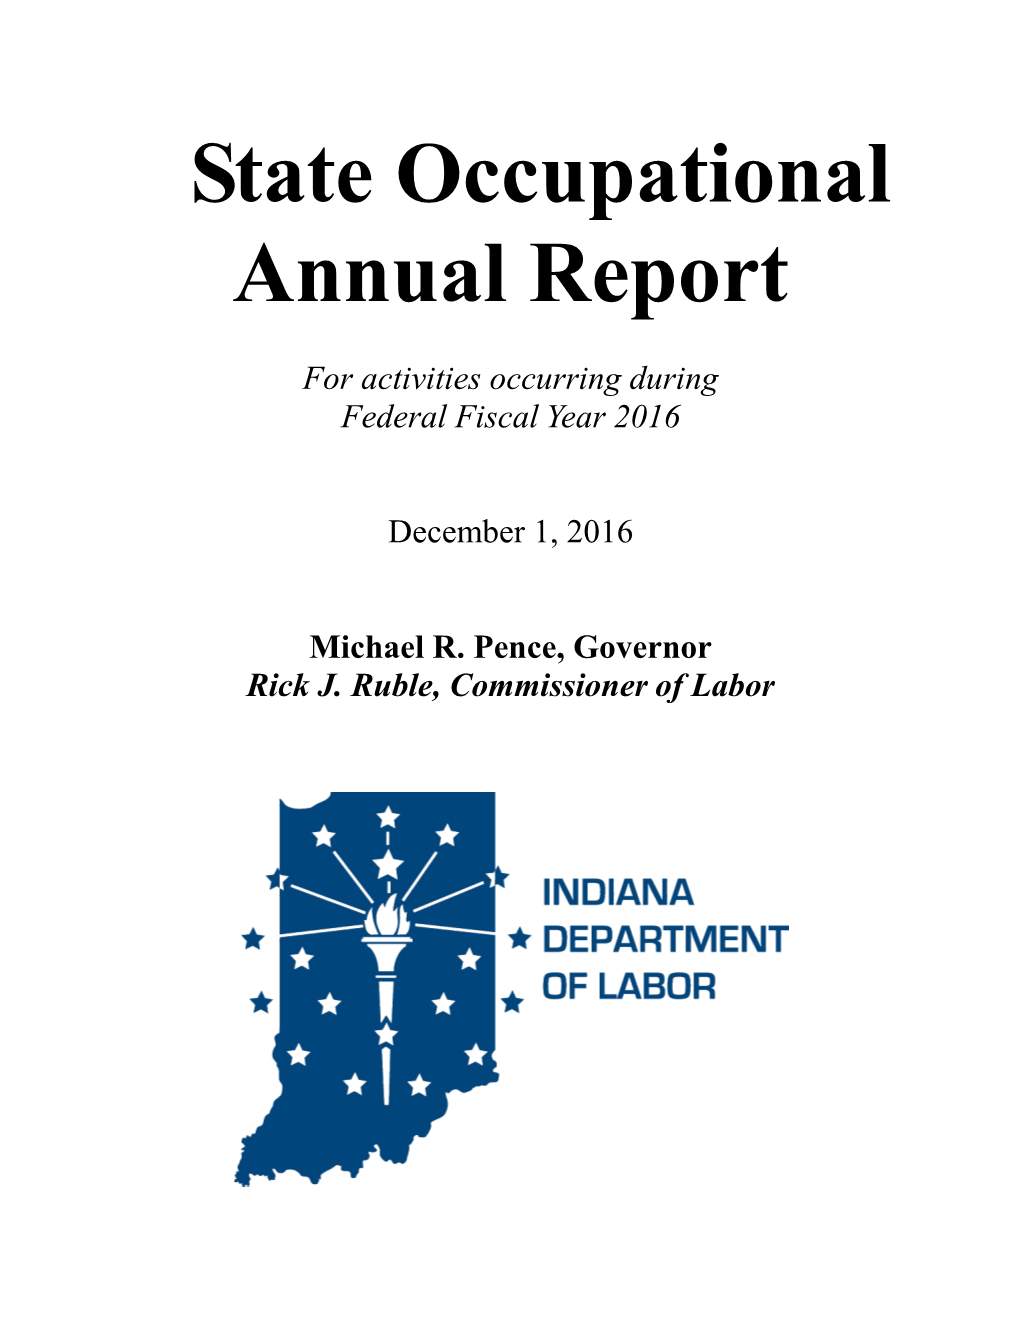 FY 2016 As Evidenced by the FY 2016 State Activity Mandated Measures (SAMM)